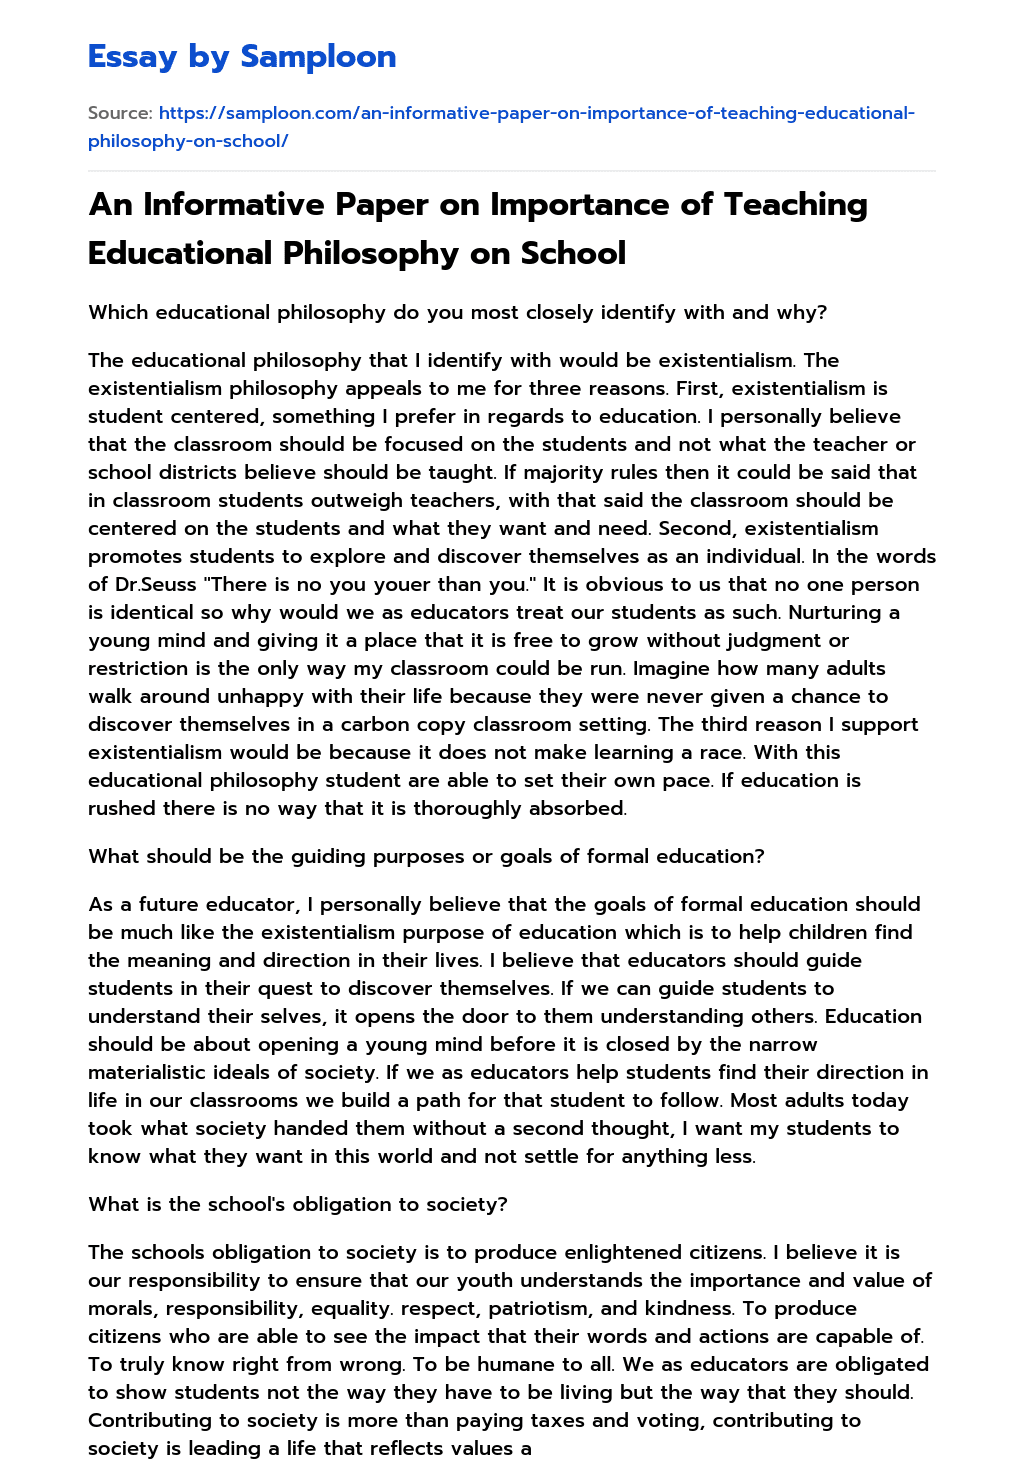 An Informative Paper on Importance of Teaching Educational Philosophy on School essay